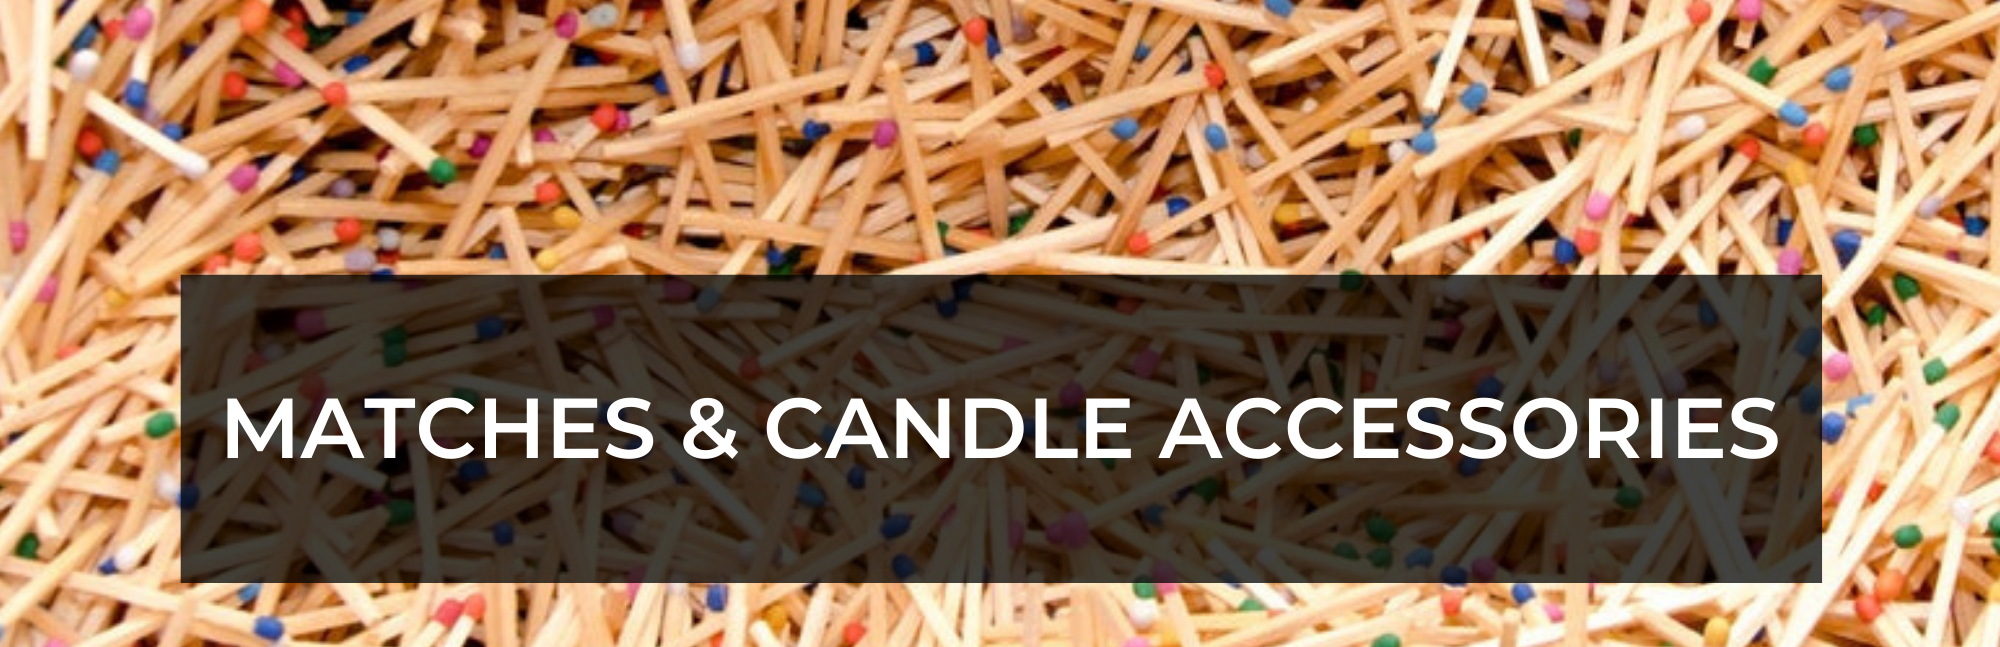 Matches & Candle Accessories